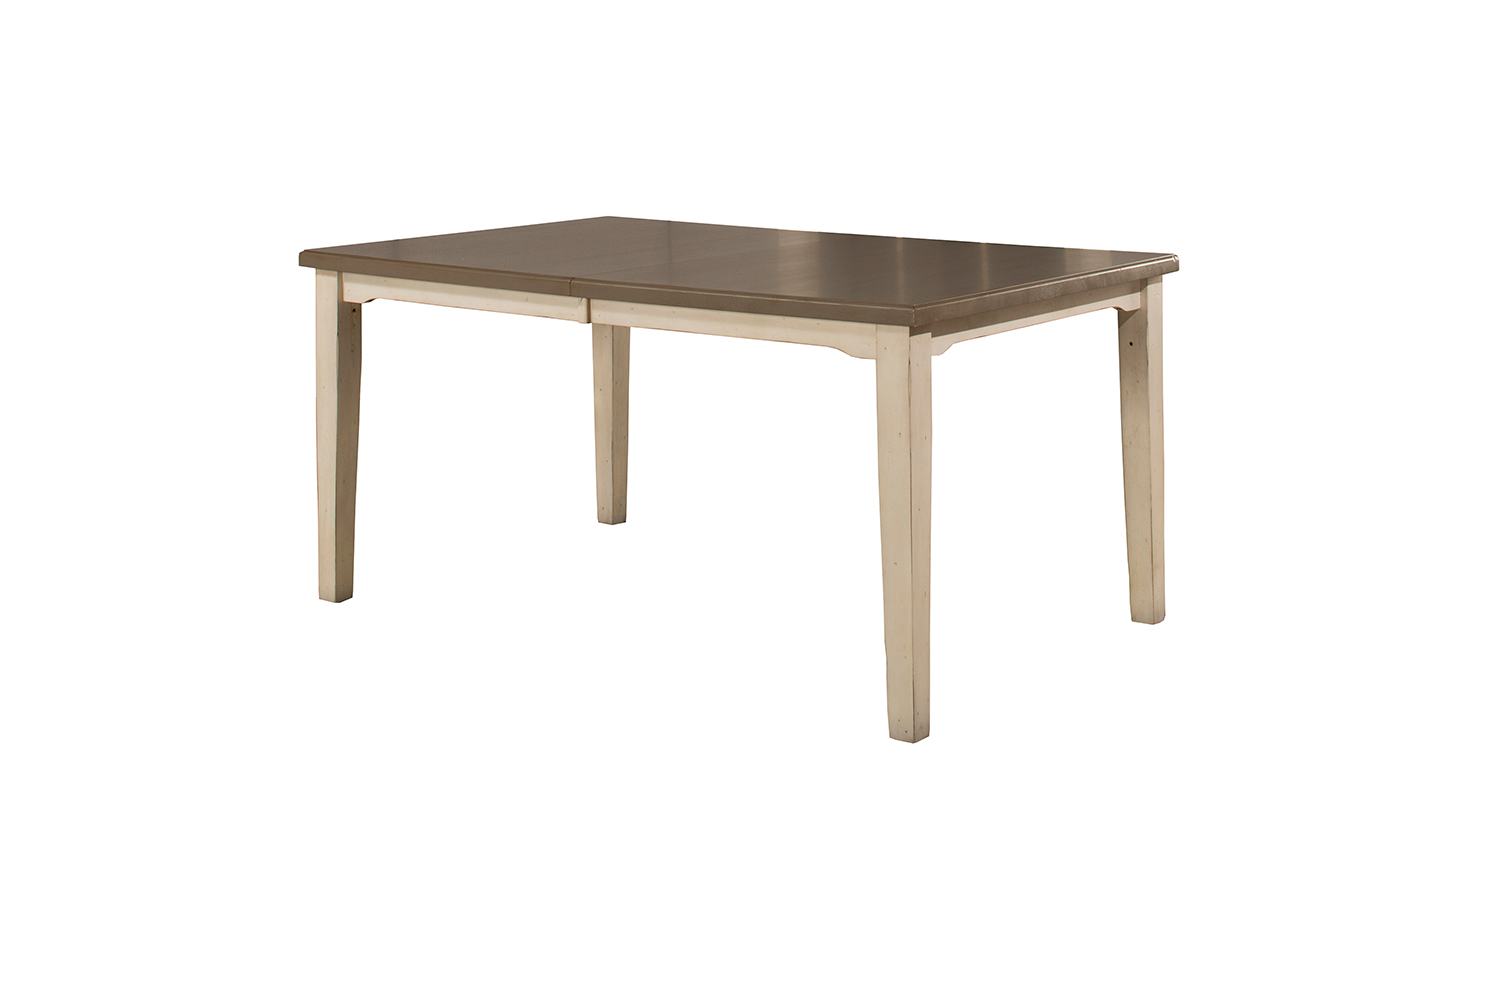 Hillsdale Clarion Rectangle Dining Table - Gray/White